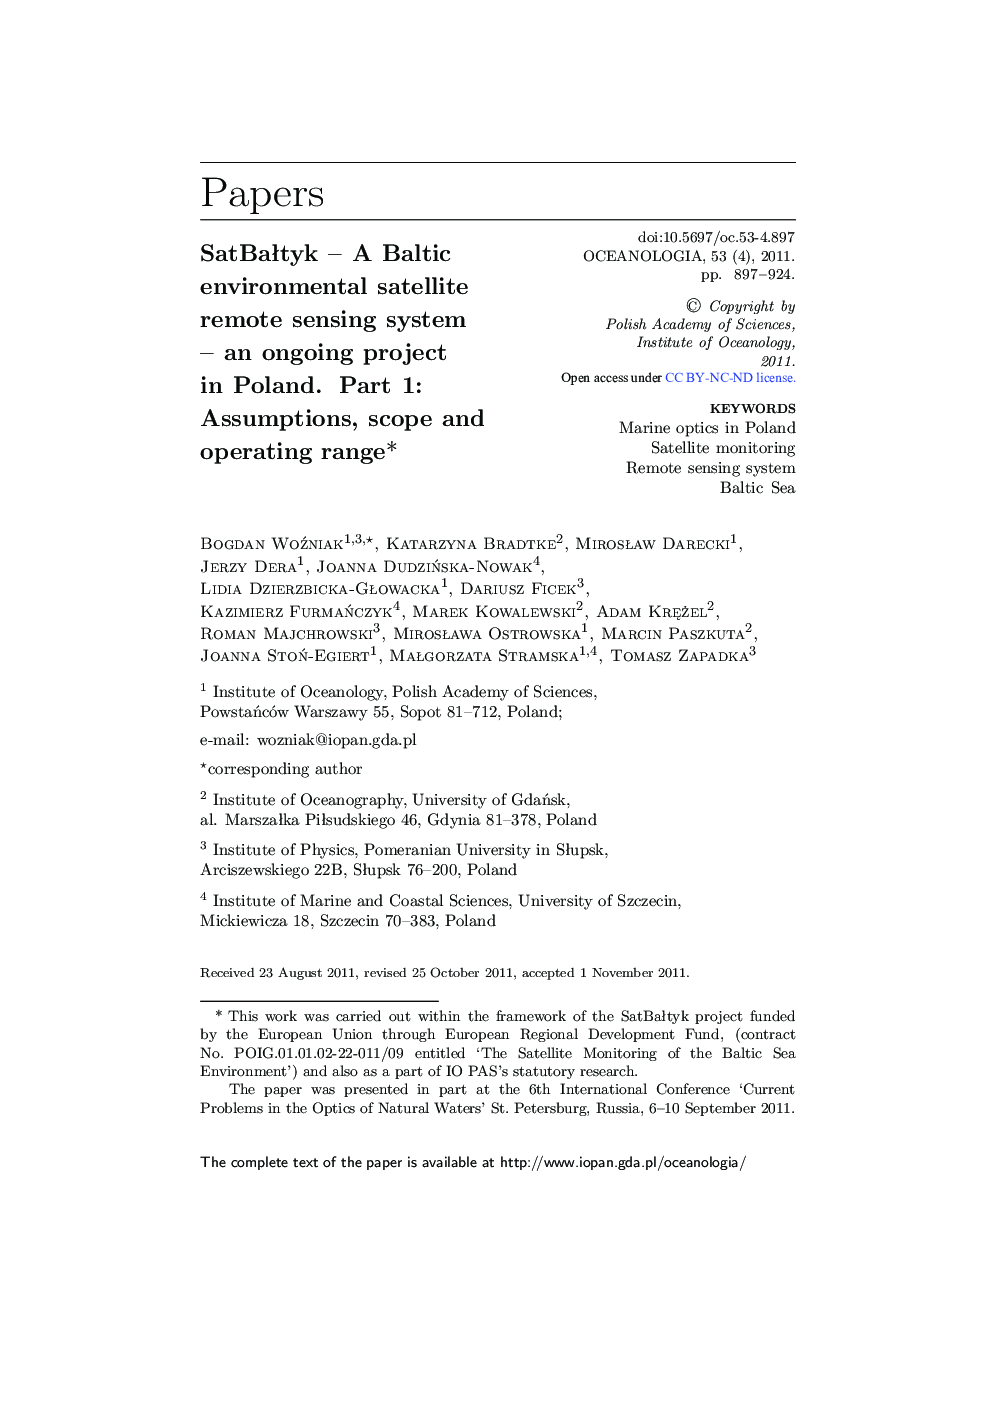 SatBałtyk – A Baltic environmental satellite remote sensing system – an ongoing project in Poland. Part 1: Assumptions, scope and operating range* 